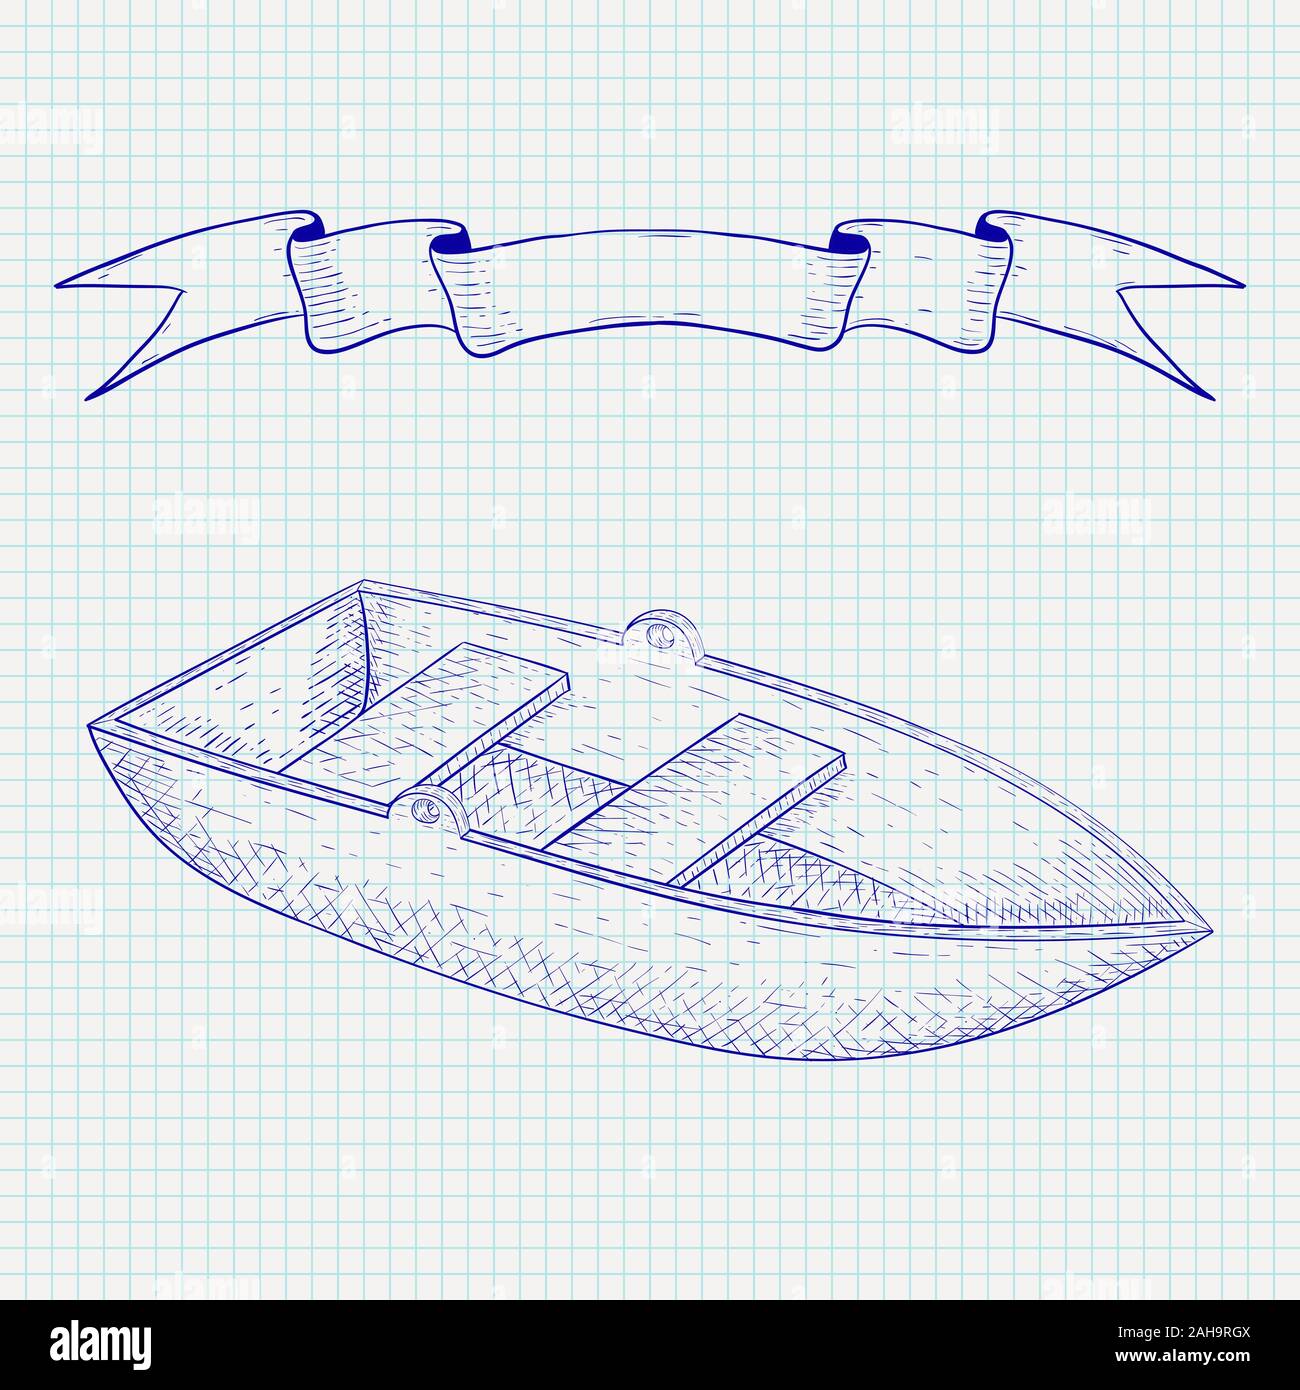 Boat Drawing  How To Draw A Boat Step By Step